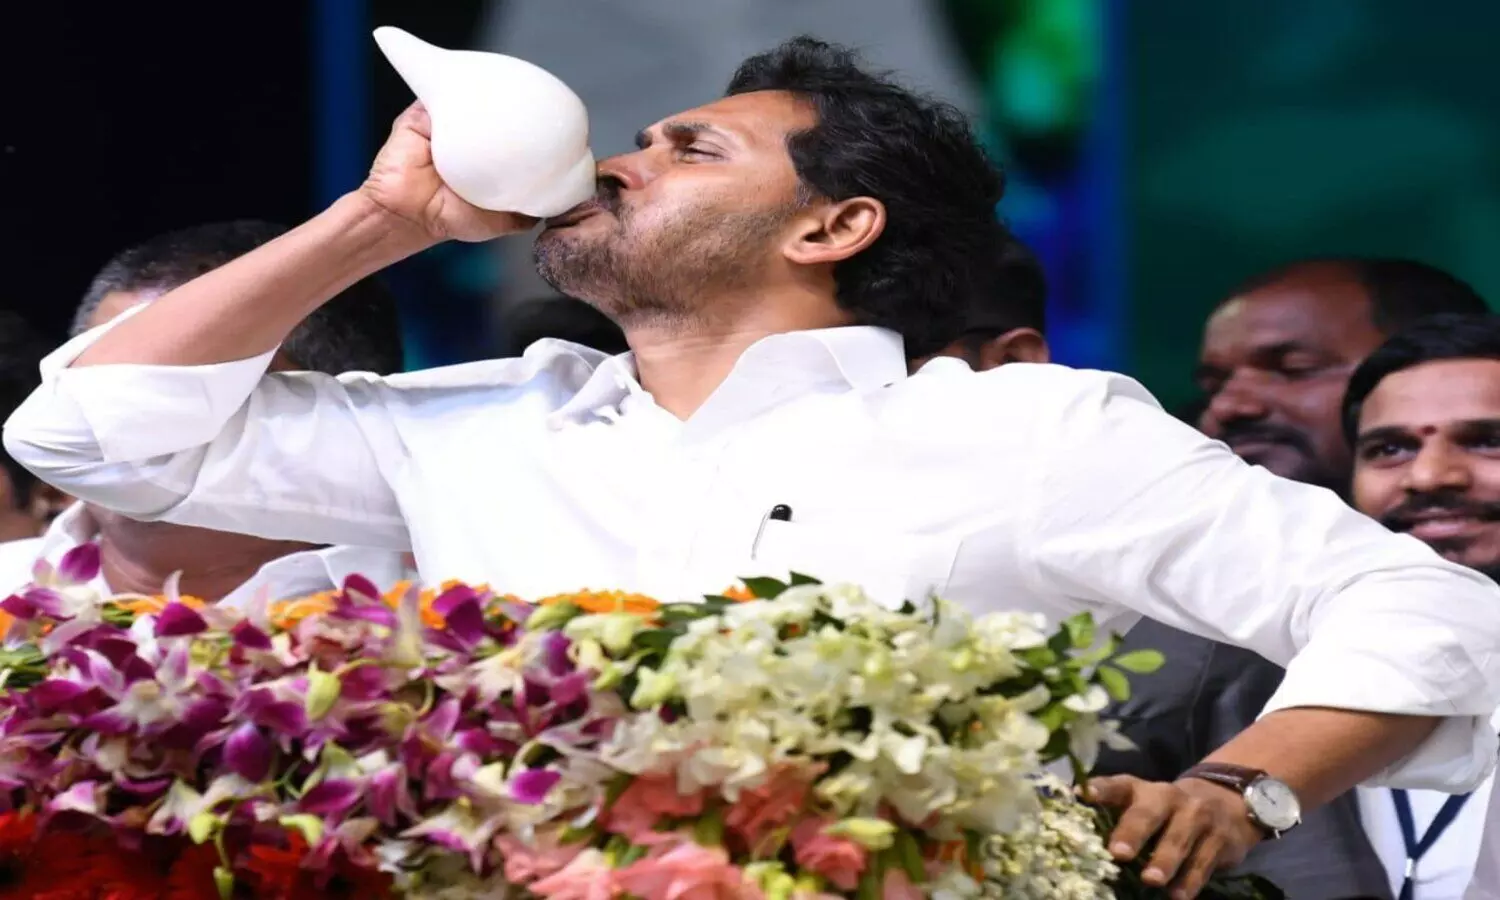 Massive ‘Siddham’ public meeting of YSR Congress booster dose for cadres; Jagan sets tone for 2024 poll campaign